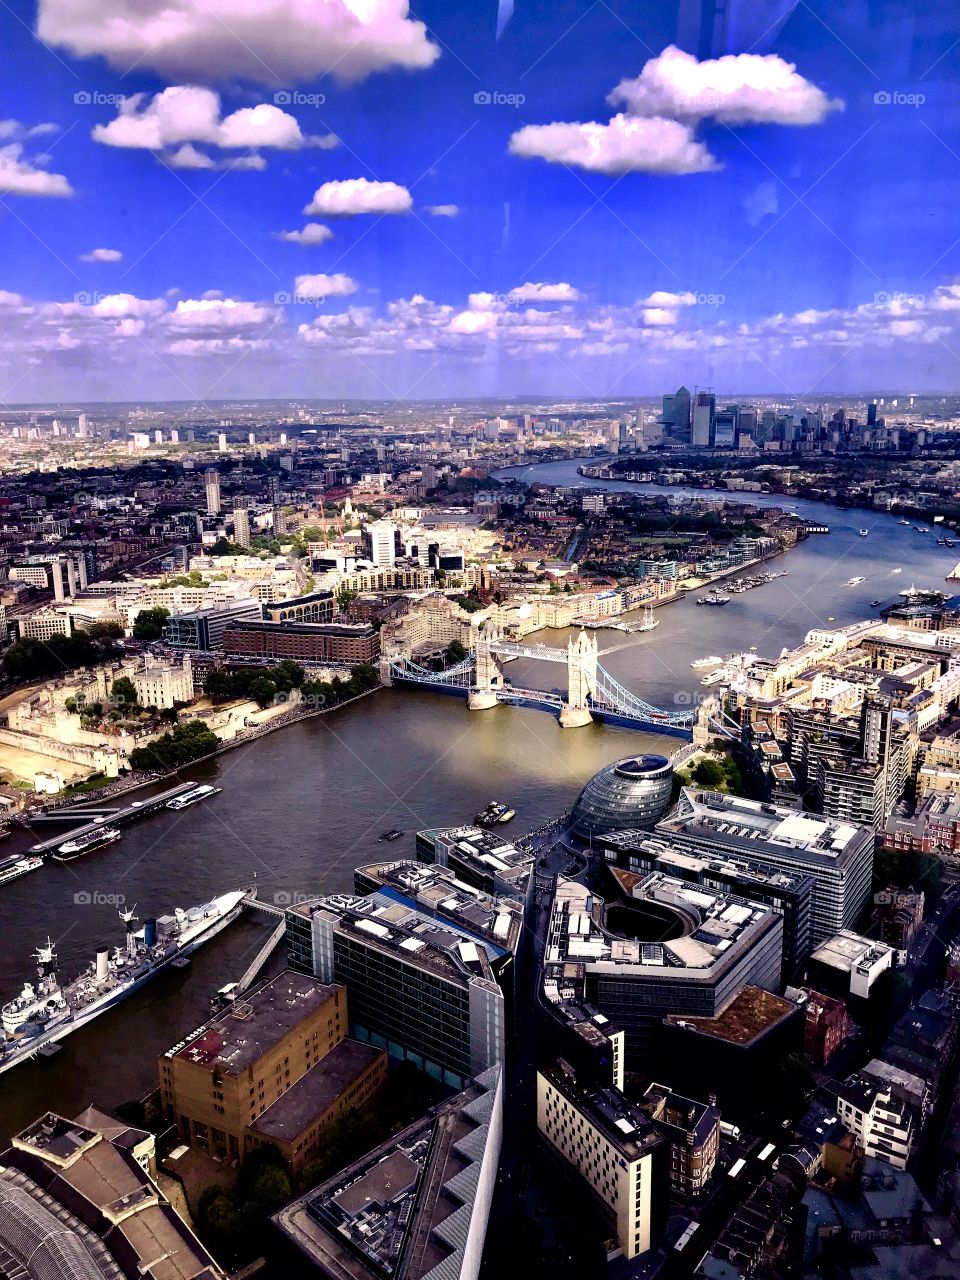 View of the river Thames with historic and modern buildings taken from the Shard